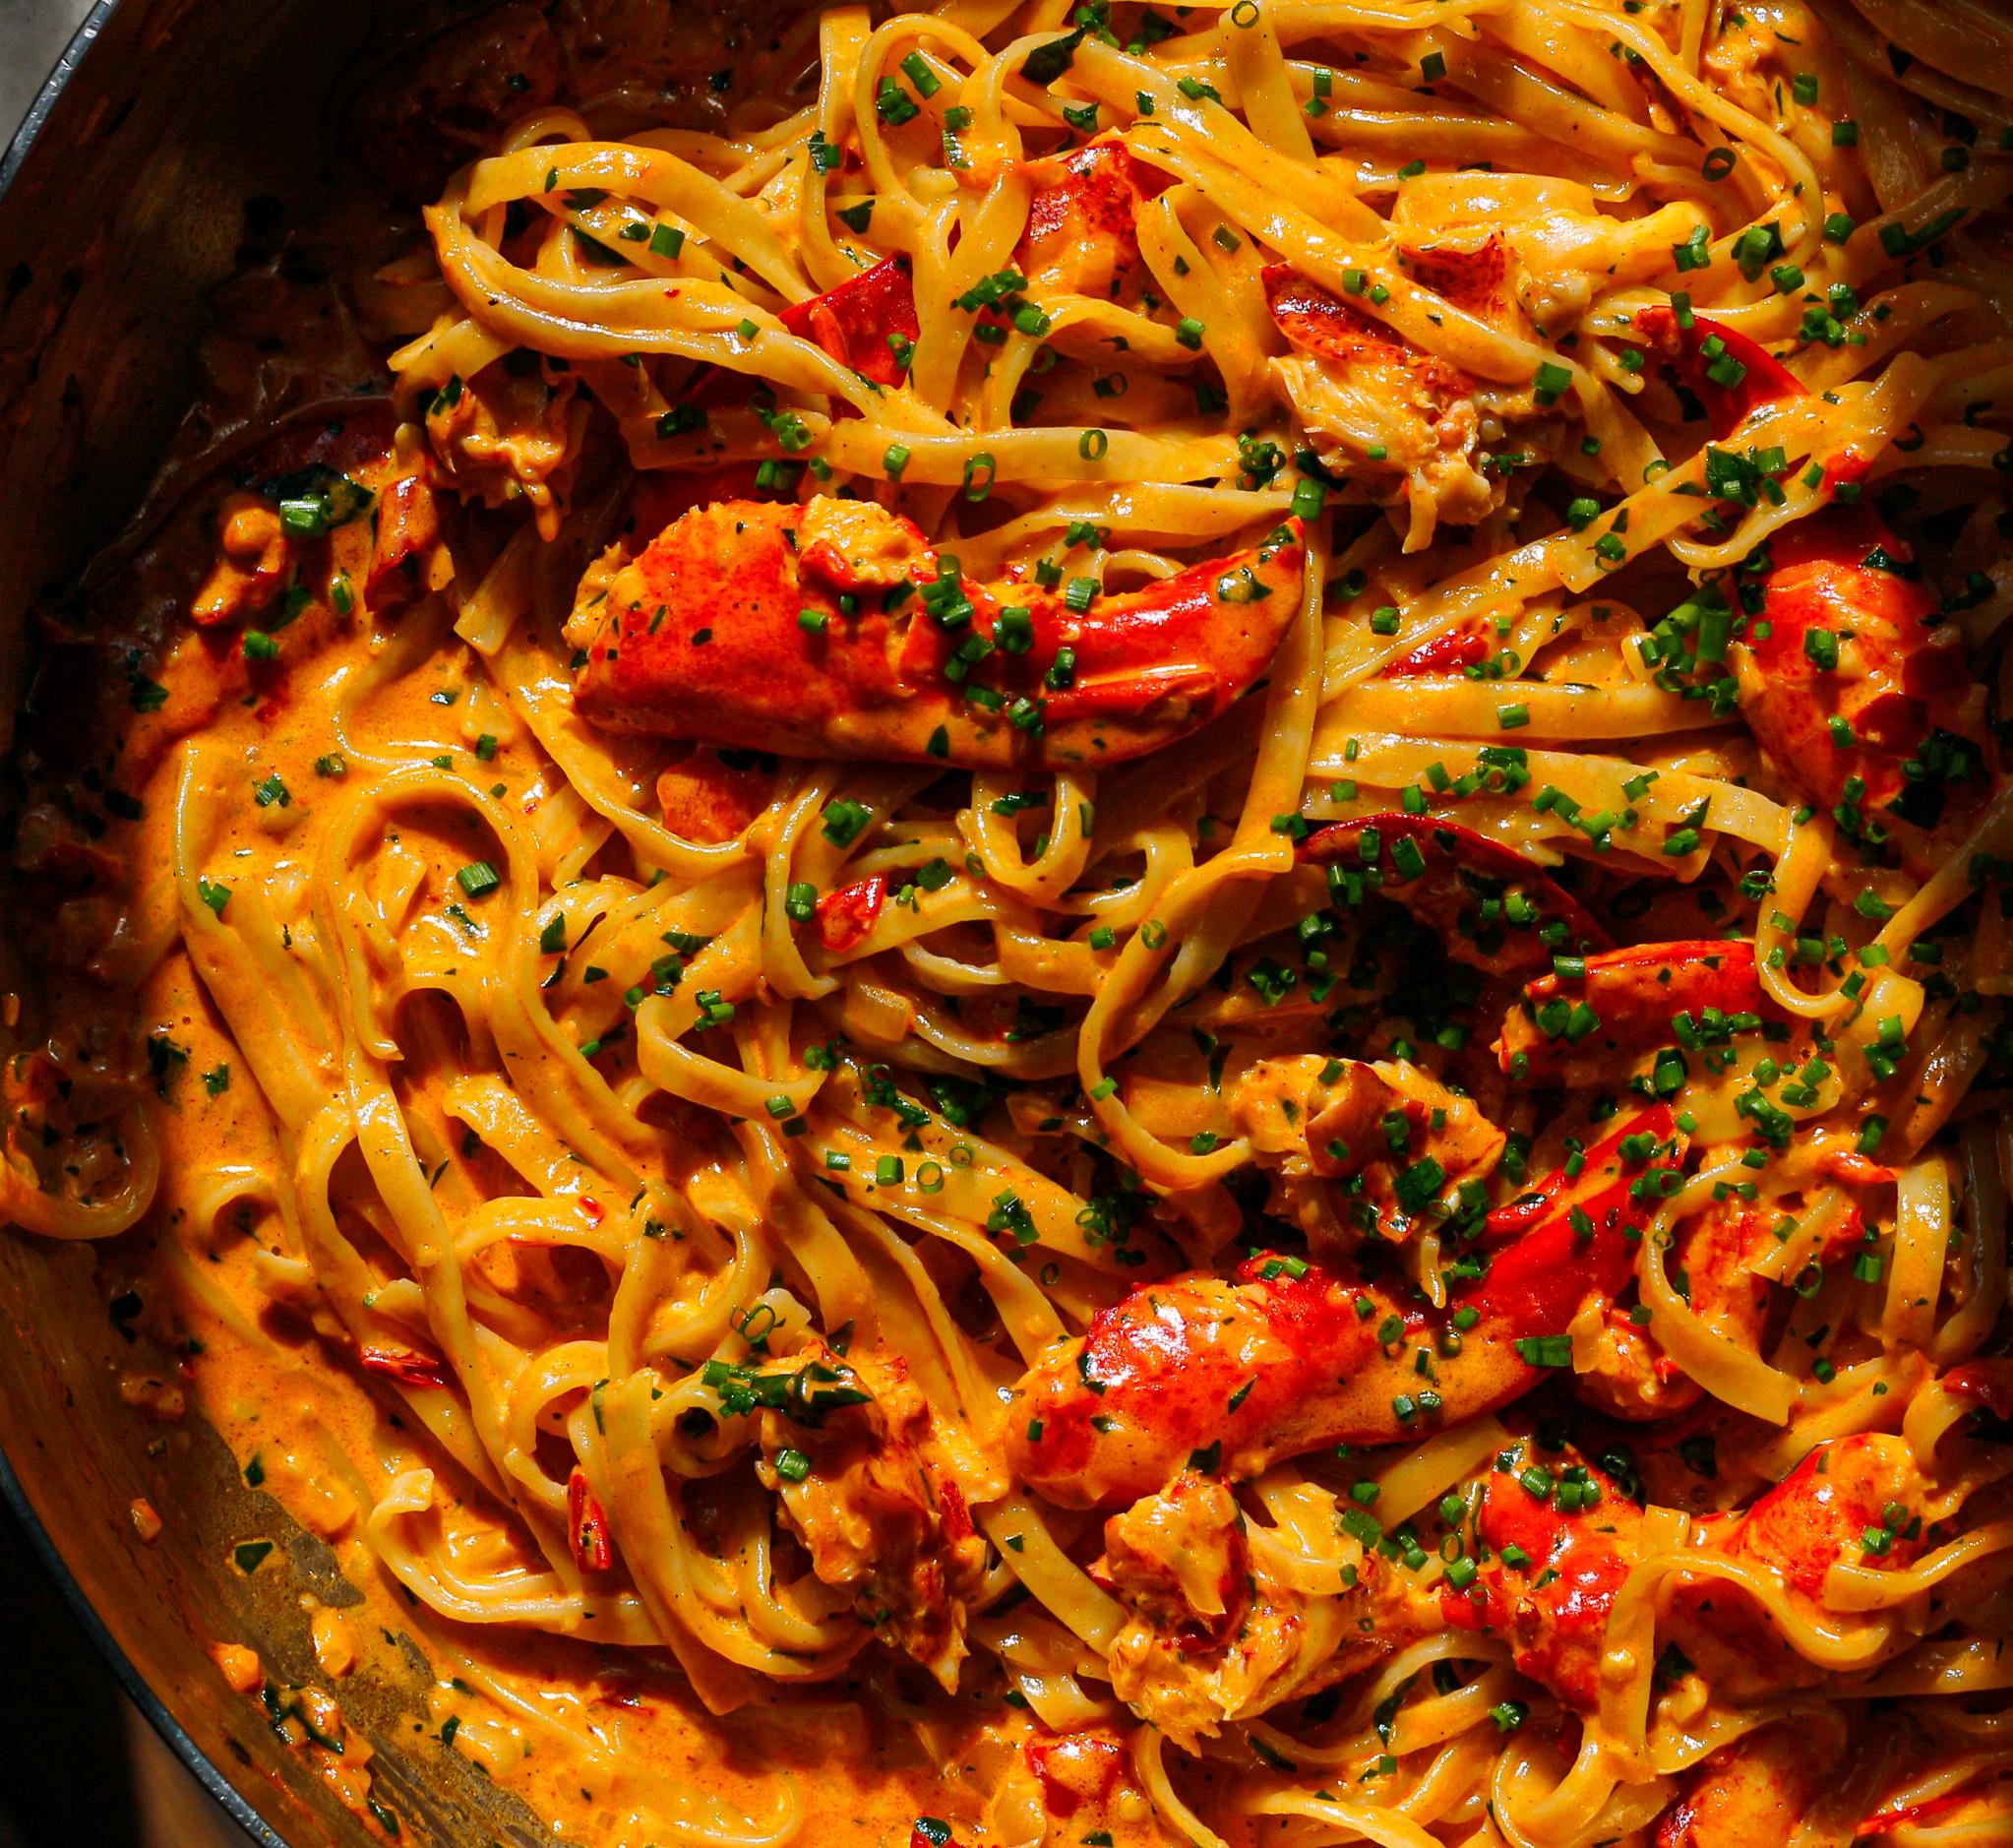  Juicy lobster meat and savory noodles, all dressed in a tangy Asian-inspired dressing.